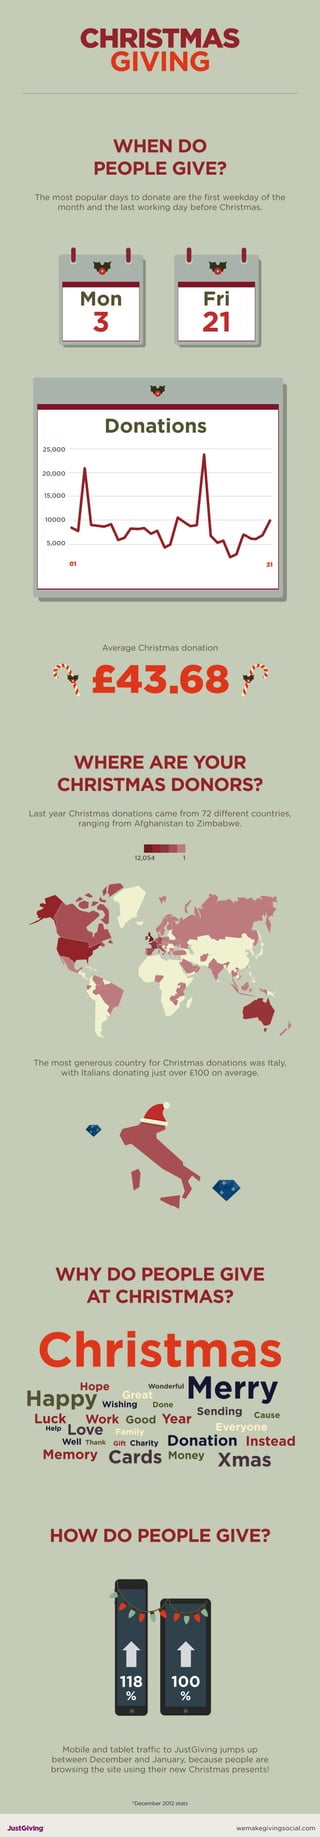 WHEN DO
PEOPLE GIVE?
The most popular days to donate are the ﬁrst weekday of the
month and the last working day before Christmas.

Mon

Fri

3

21

Donations
25,000

20,000
15,000

10000

5,000
01

31

Average Christmas donation

WHERE ARE YOUR
CHRISTMAS DONORS?
Last year Christmas donations came from 72 different countries,
ranging from Afghanistan to Zimbabwe.

12,054

1

The most generous country for Christmas donations was Italy,
with Italians donating just over £100 on average.

WHY DO PEOPLE GIVE
AT CHRISTMAS?

Christmas
Hope

Happy
Luck
Help

Great

Wishing

Done

Merry

Work Good Year

Love

Well

Wonderful

Thank

Memory

Family

Gift Charity

Cards

Sending Cause
Everyone

Donation Instead
Money

Xmas

HOW DO PEOPLE GIVE?

Mobile and tablet traffic to JustGiving jumps up
between December and January, because people are
browsing the site using their new Christmas presents!

*December 2012 stats

wemakegivingsocial.com

 